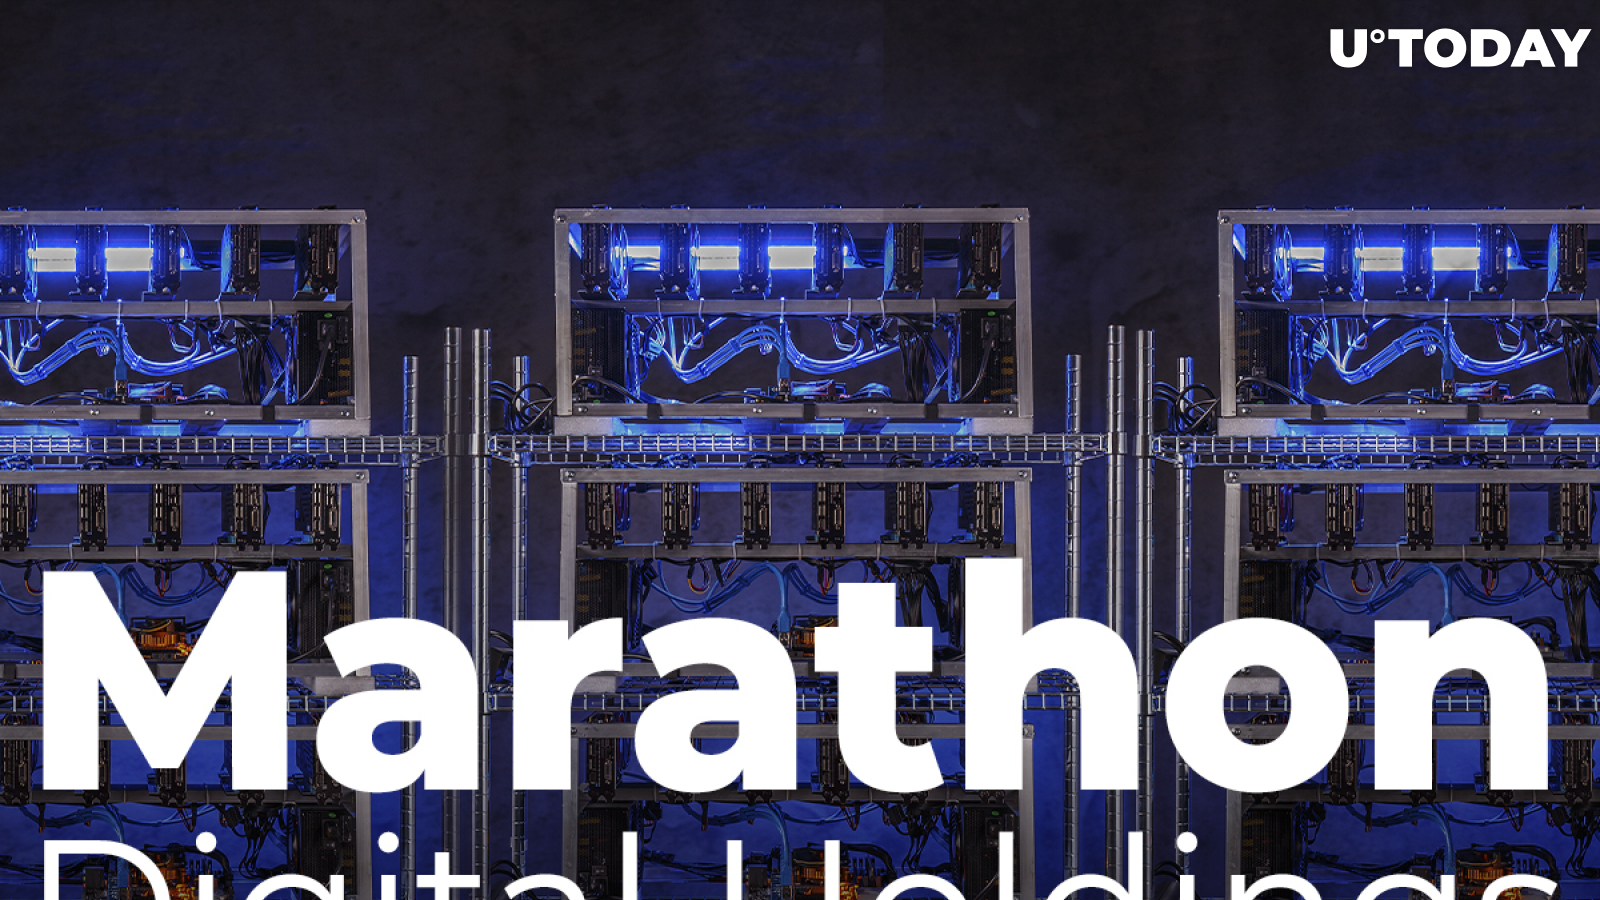 30,000 Flagship Bitcoin (BTC) Miners Ordered by Marathon Digital Holdings